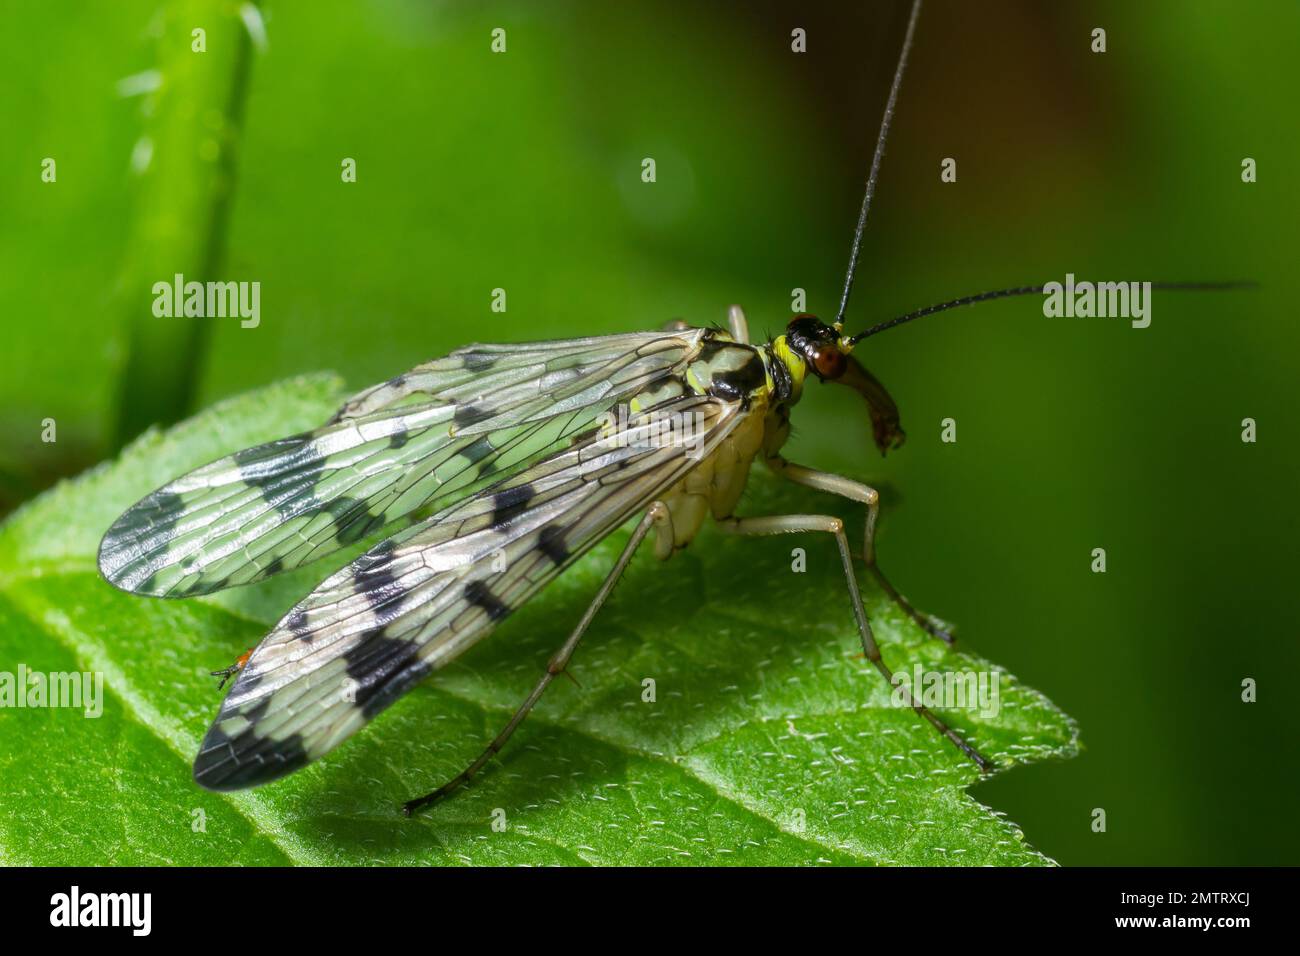 Panorpa communis is the common scorpionfly a species of scorpionfly. Its are useful insects that eat plant pests. Stock Photo